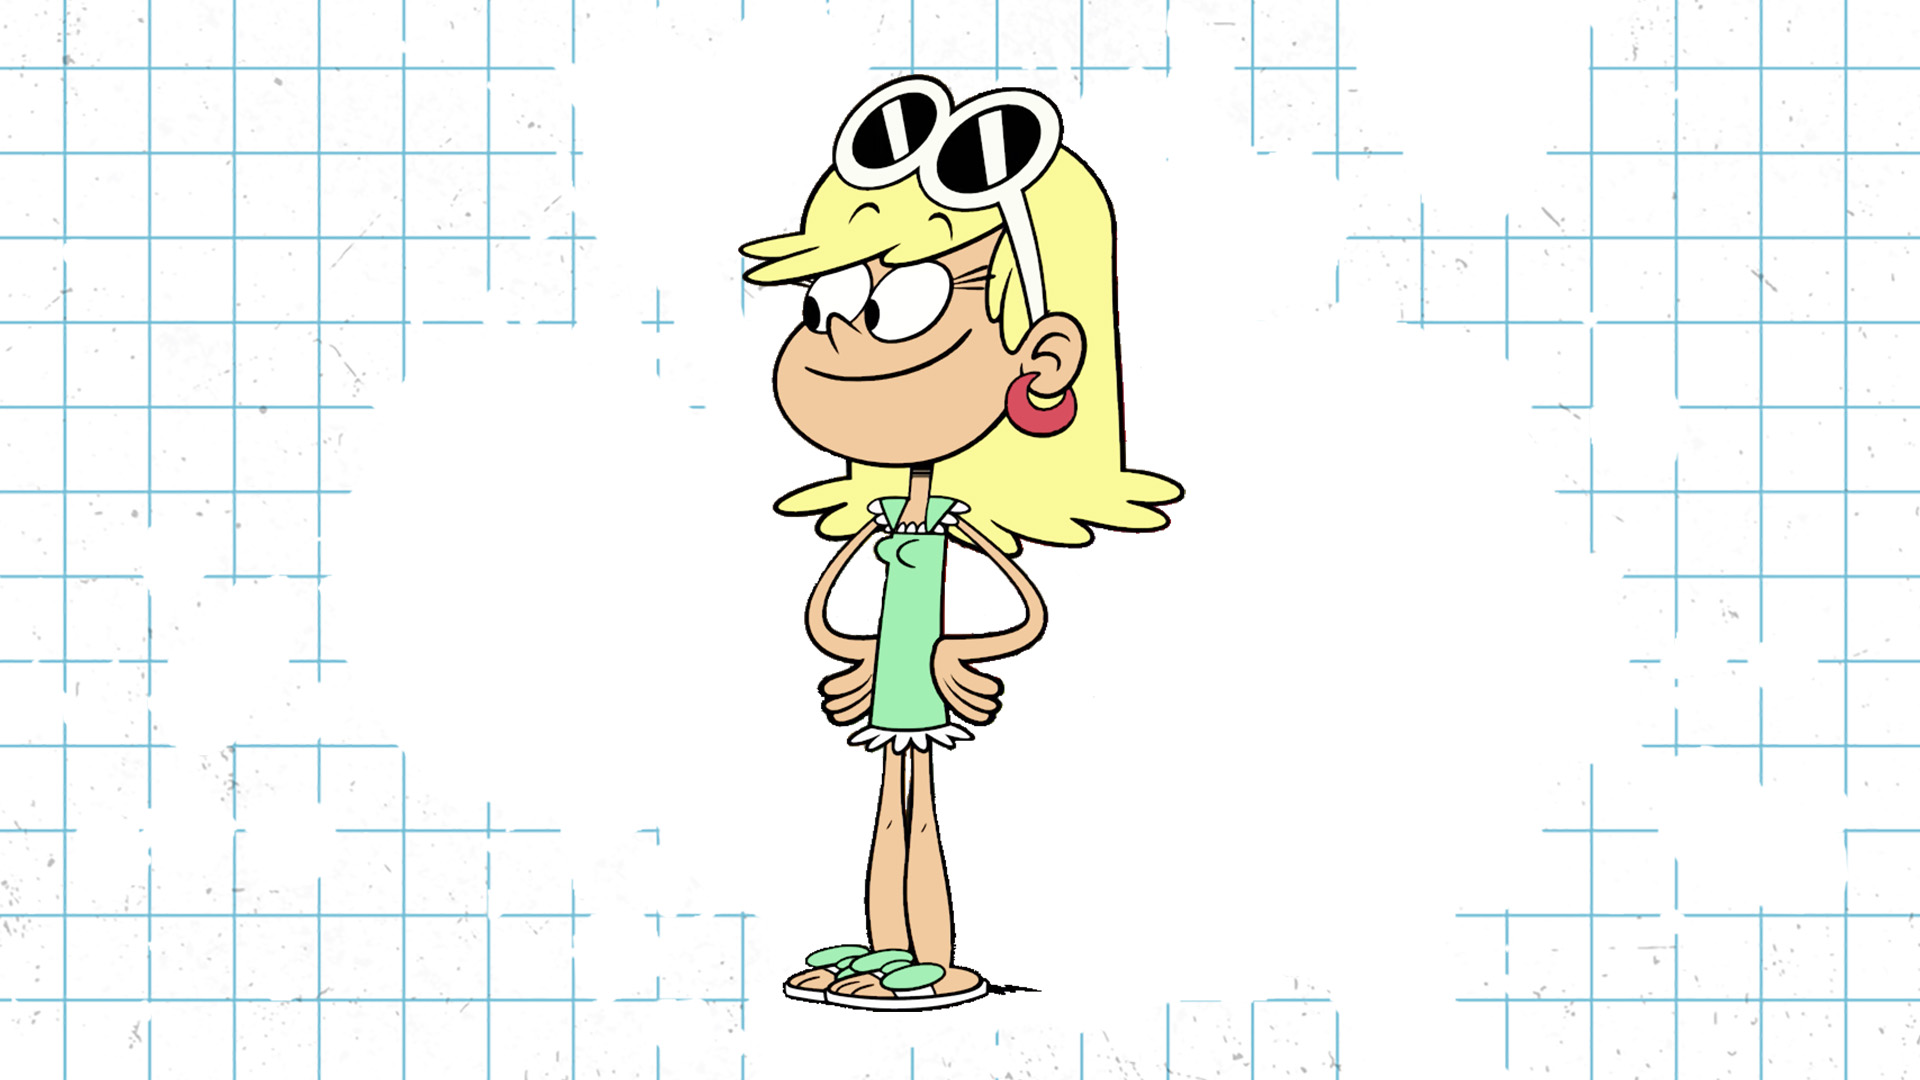 A Loud House character with blonde hair and sunglasses